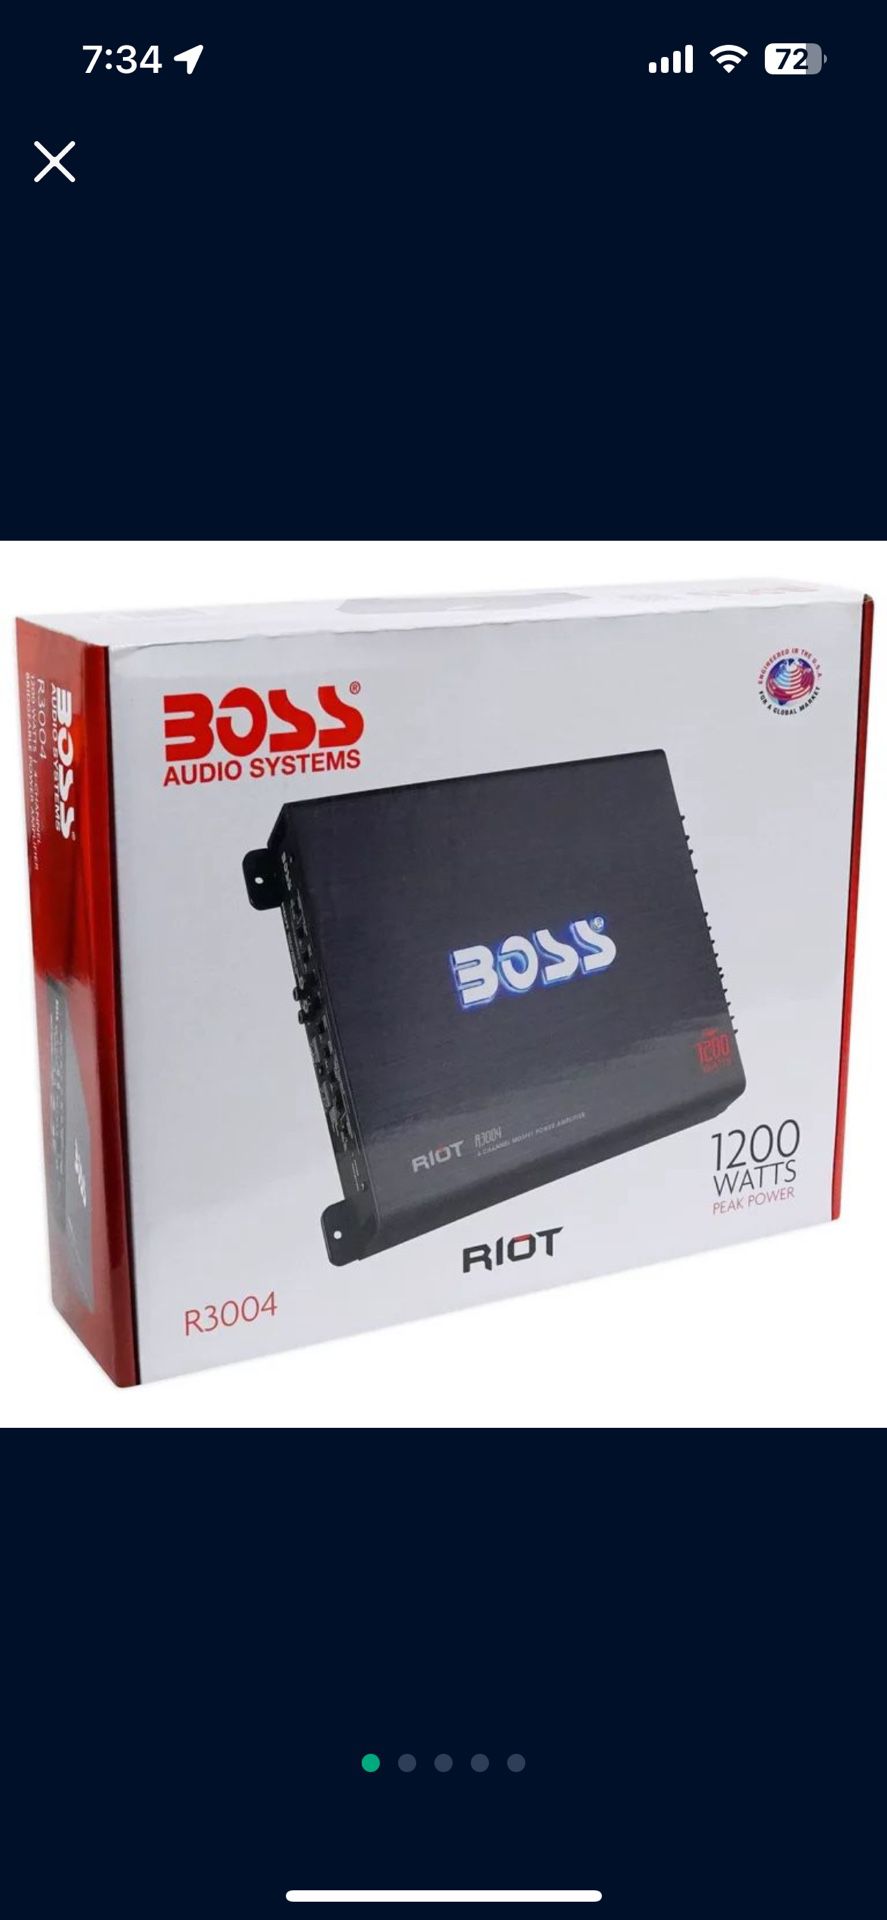 BOSS Audio Systems R6002 Riot Series Car Audio Stereo Amplifier - 1200 High Output, 2 Channel, Class A/B, 2/4 Ohm, Low/High Level Inputs, High/Low Pas